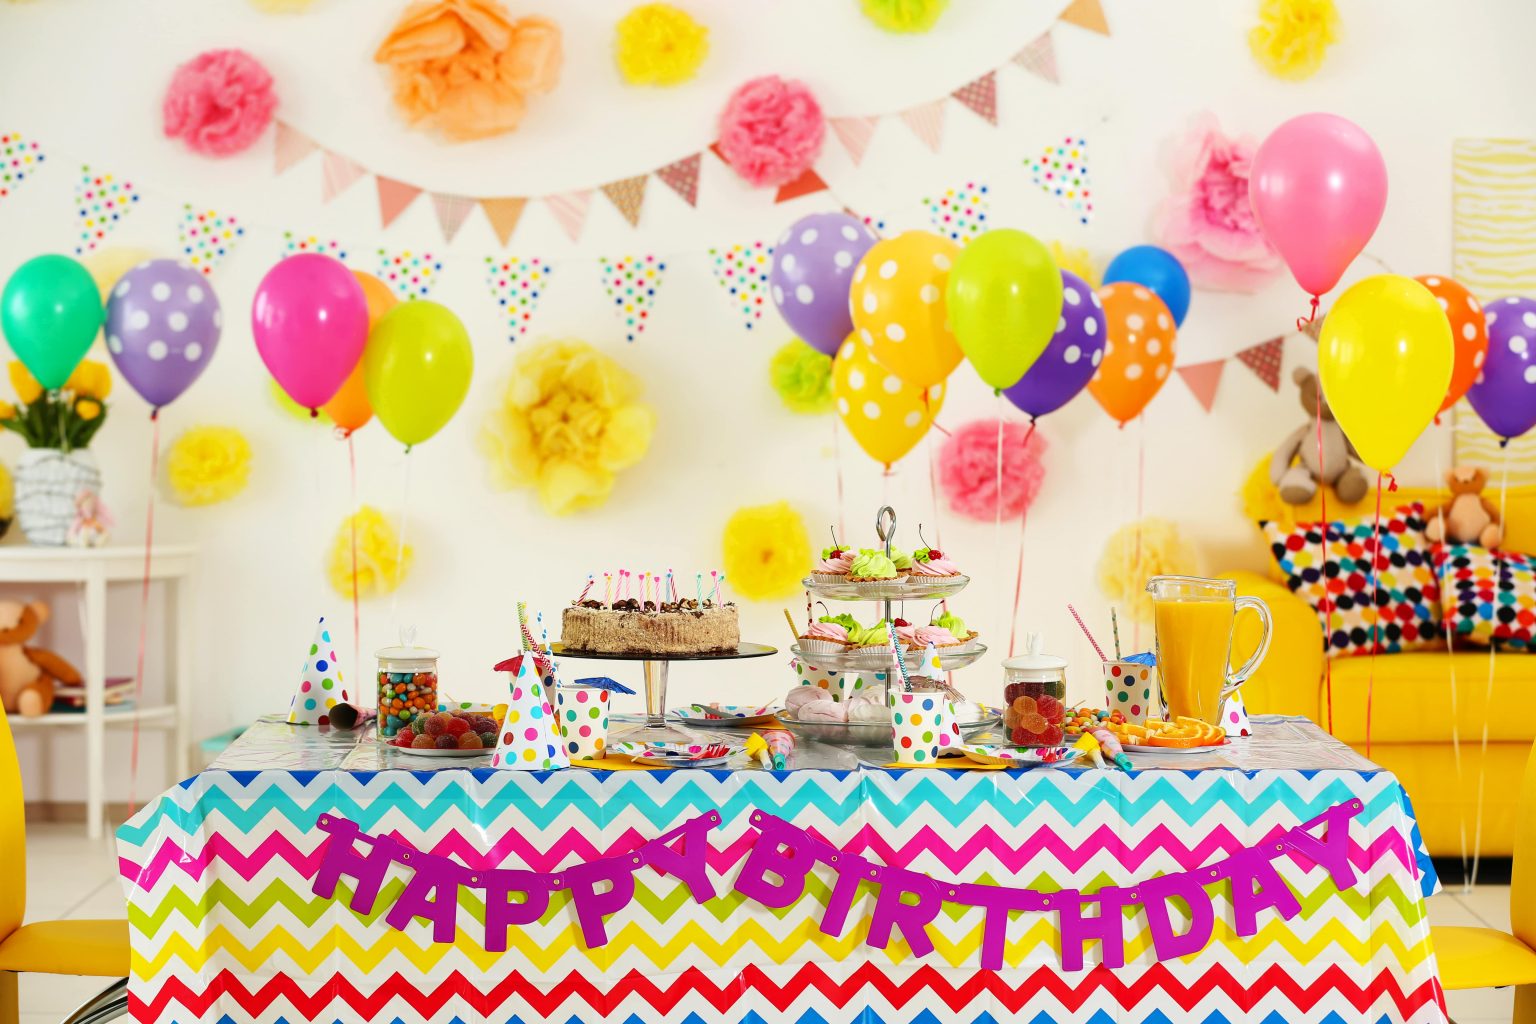 Simple Birthday Decoration ideas at Home | Origami Events Salem ...